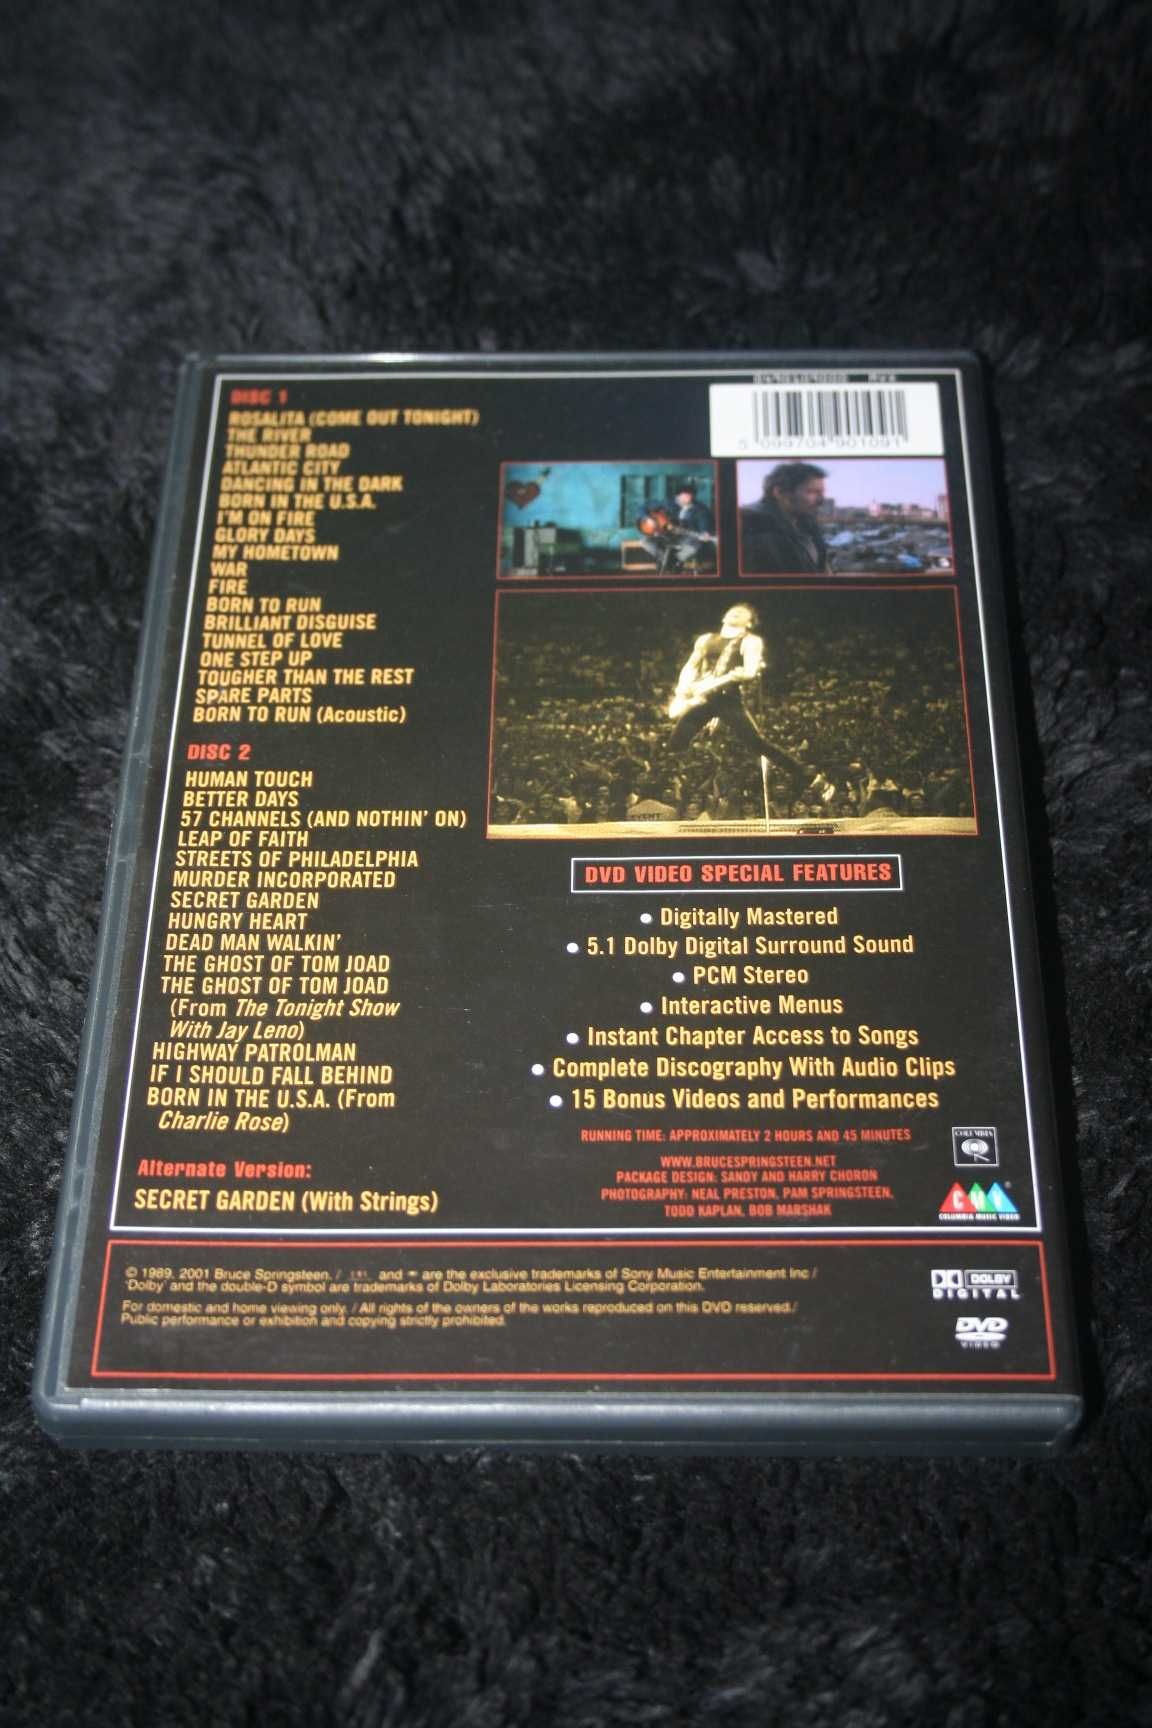 Bruce Springsteen - The Complete Video Anthology, 1978/2000